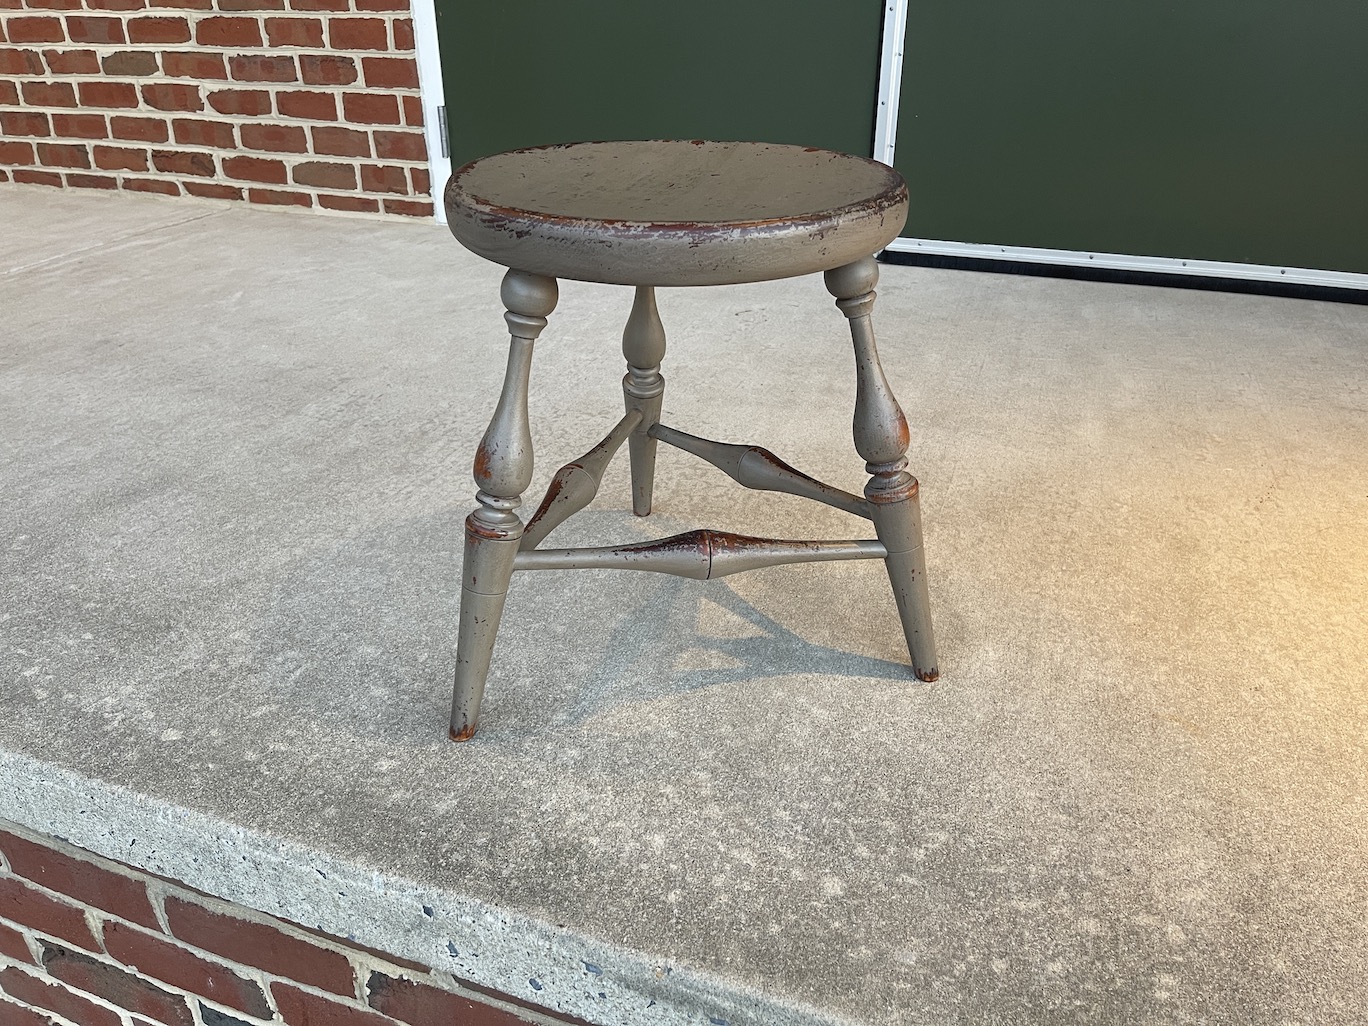 Painted Historical Farm Table Stool Image